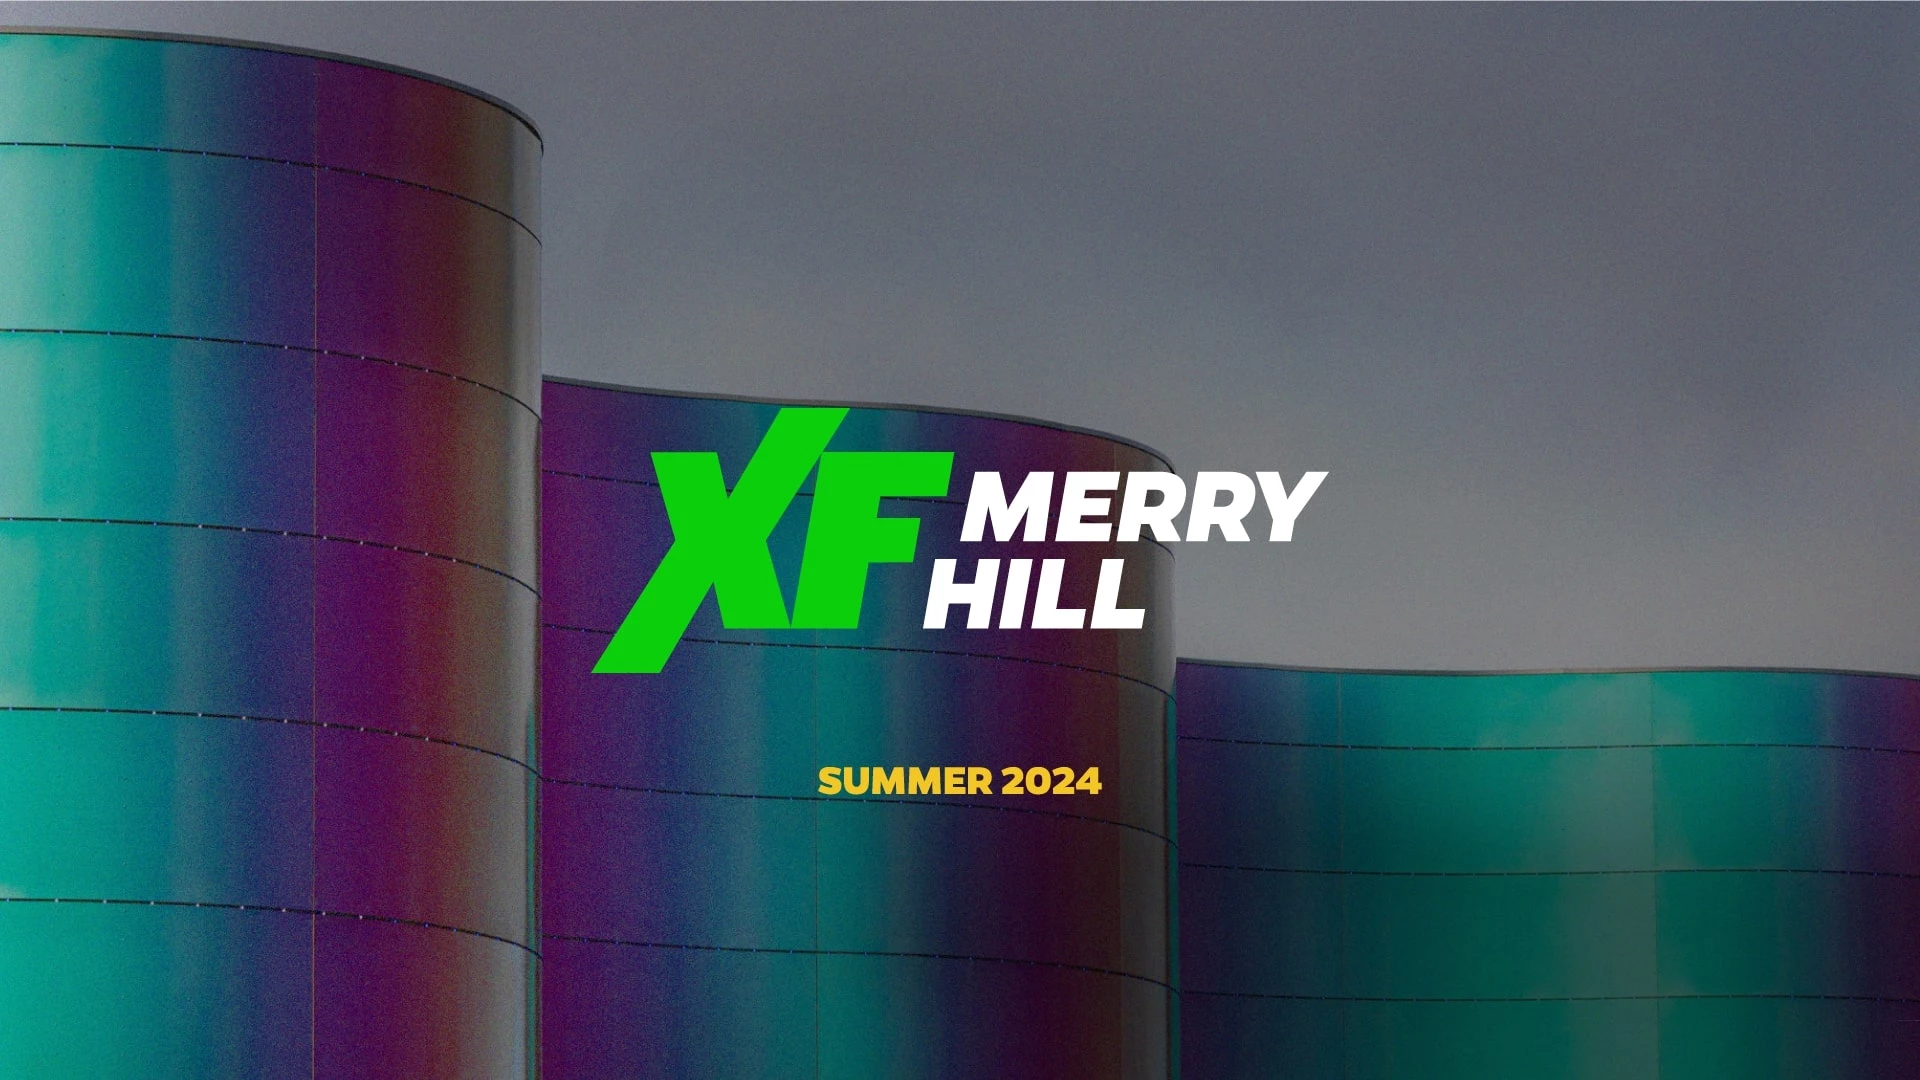 XTRAFIT, coming soon to Merry Hill